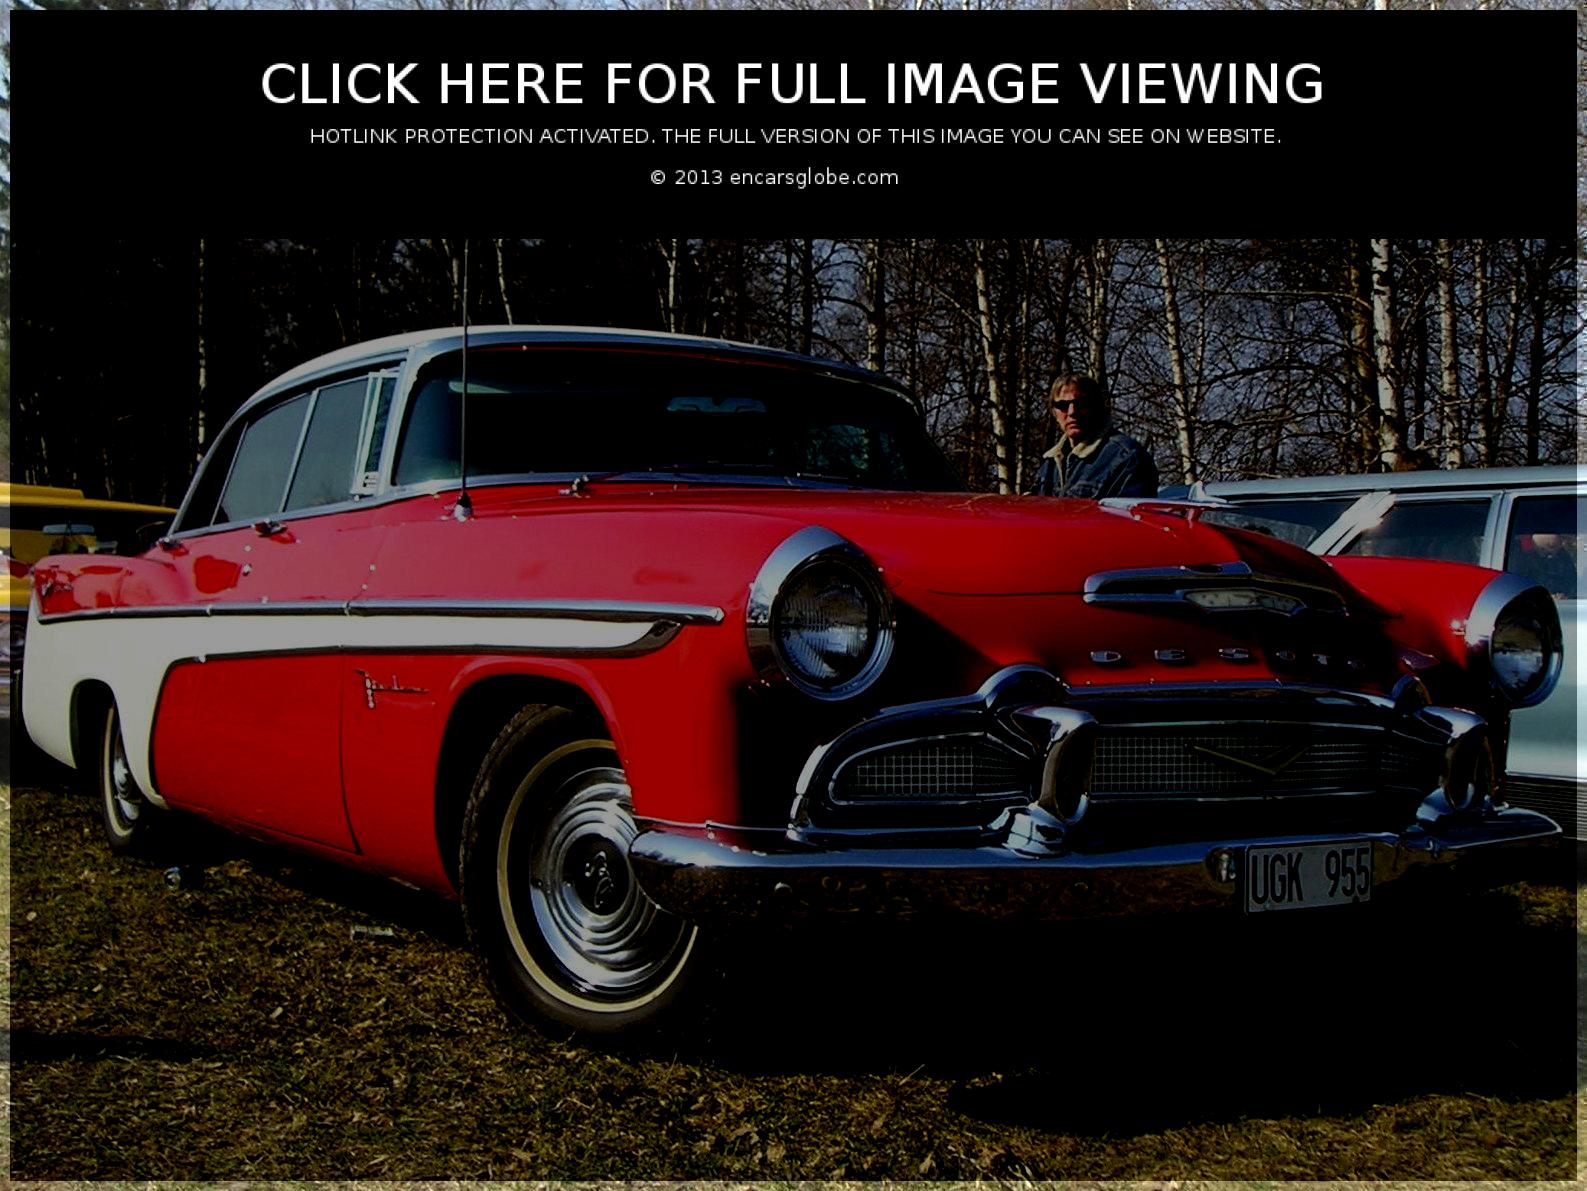 De Soto Firedome 4dr HT Photo Gallery: Photo #01 out of 9, Image ...